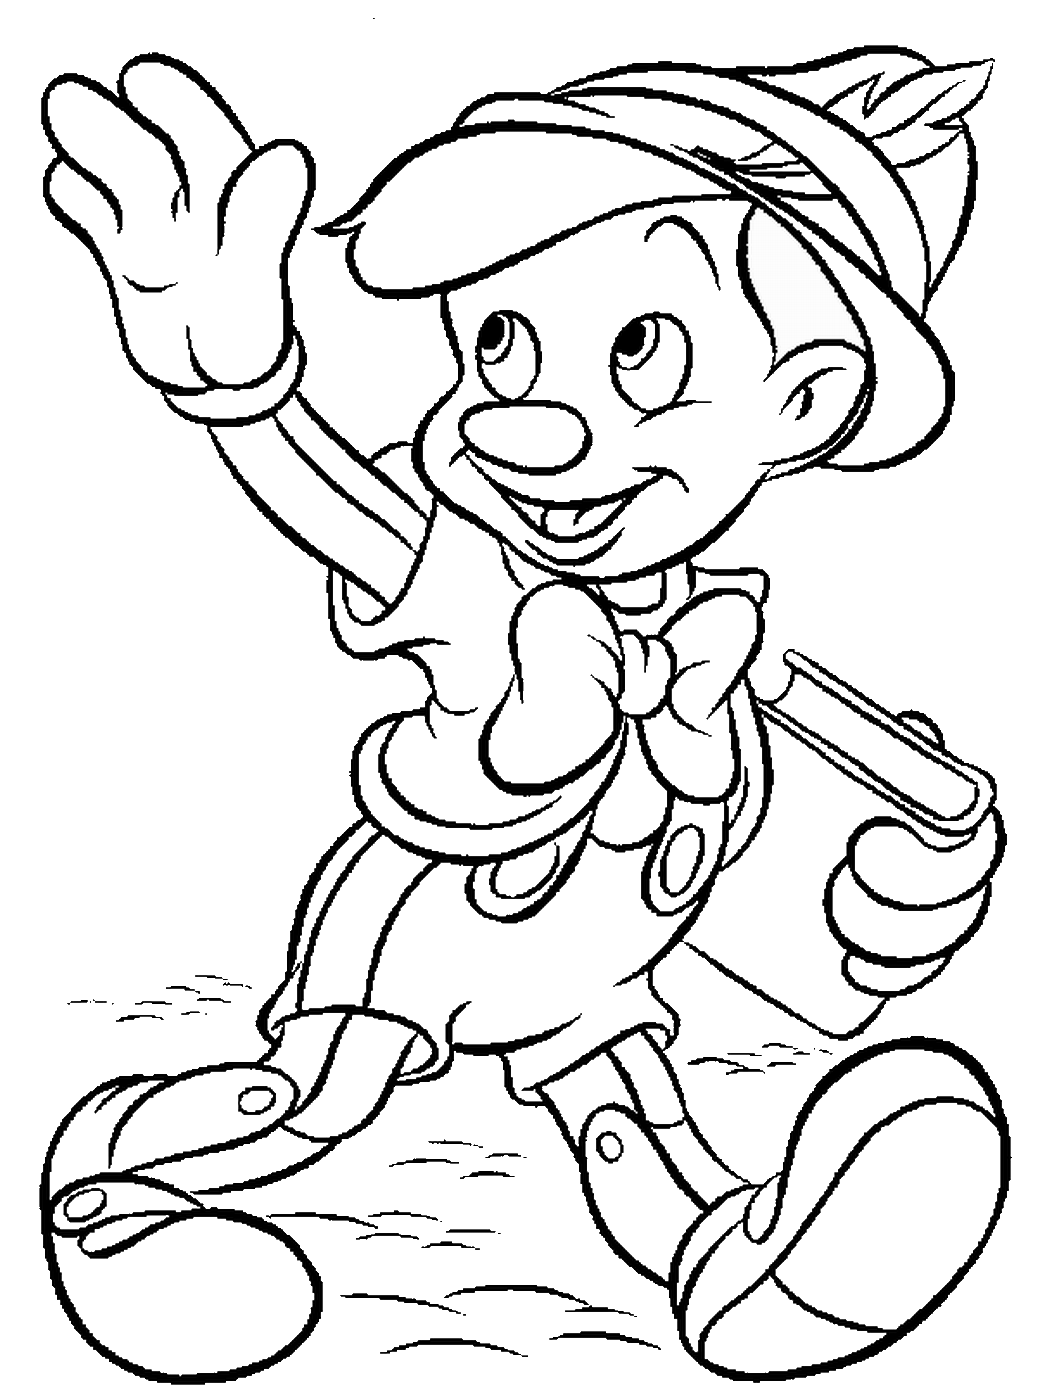 Pinocchio Coloring Pages TV Film Pinocchio_coloring_16 Printable 2020 06328 Coloring4free